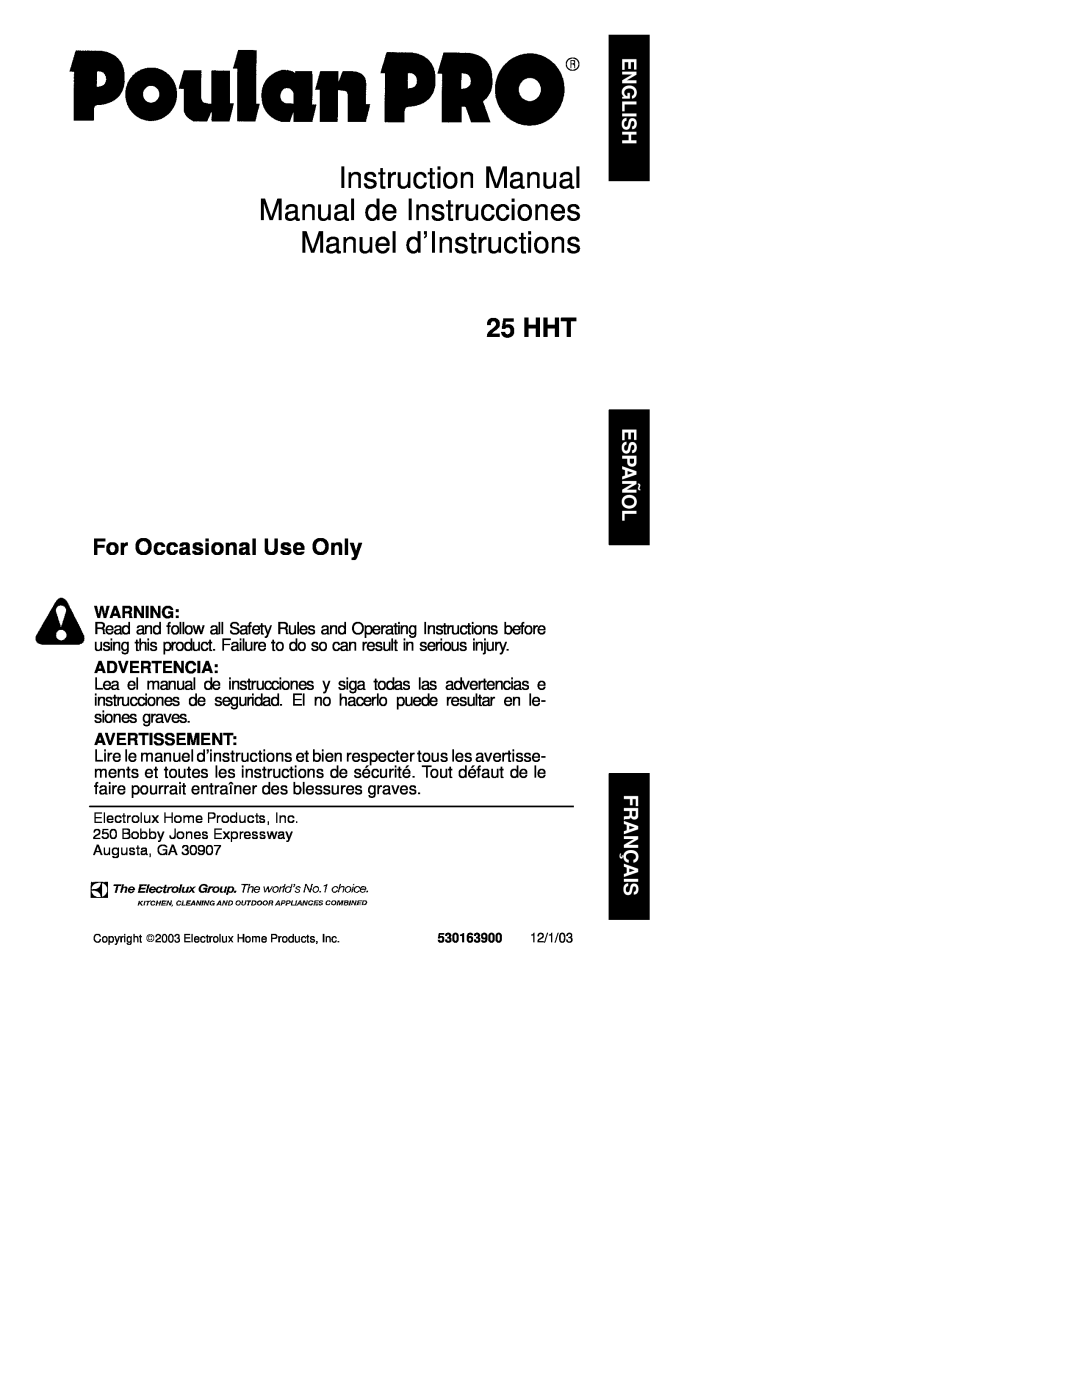 Poulan 530163900 instruction manual Advertencia, Avertissement, 25 HHT, For Occasional Use Only 